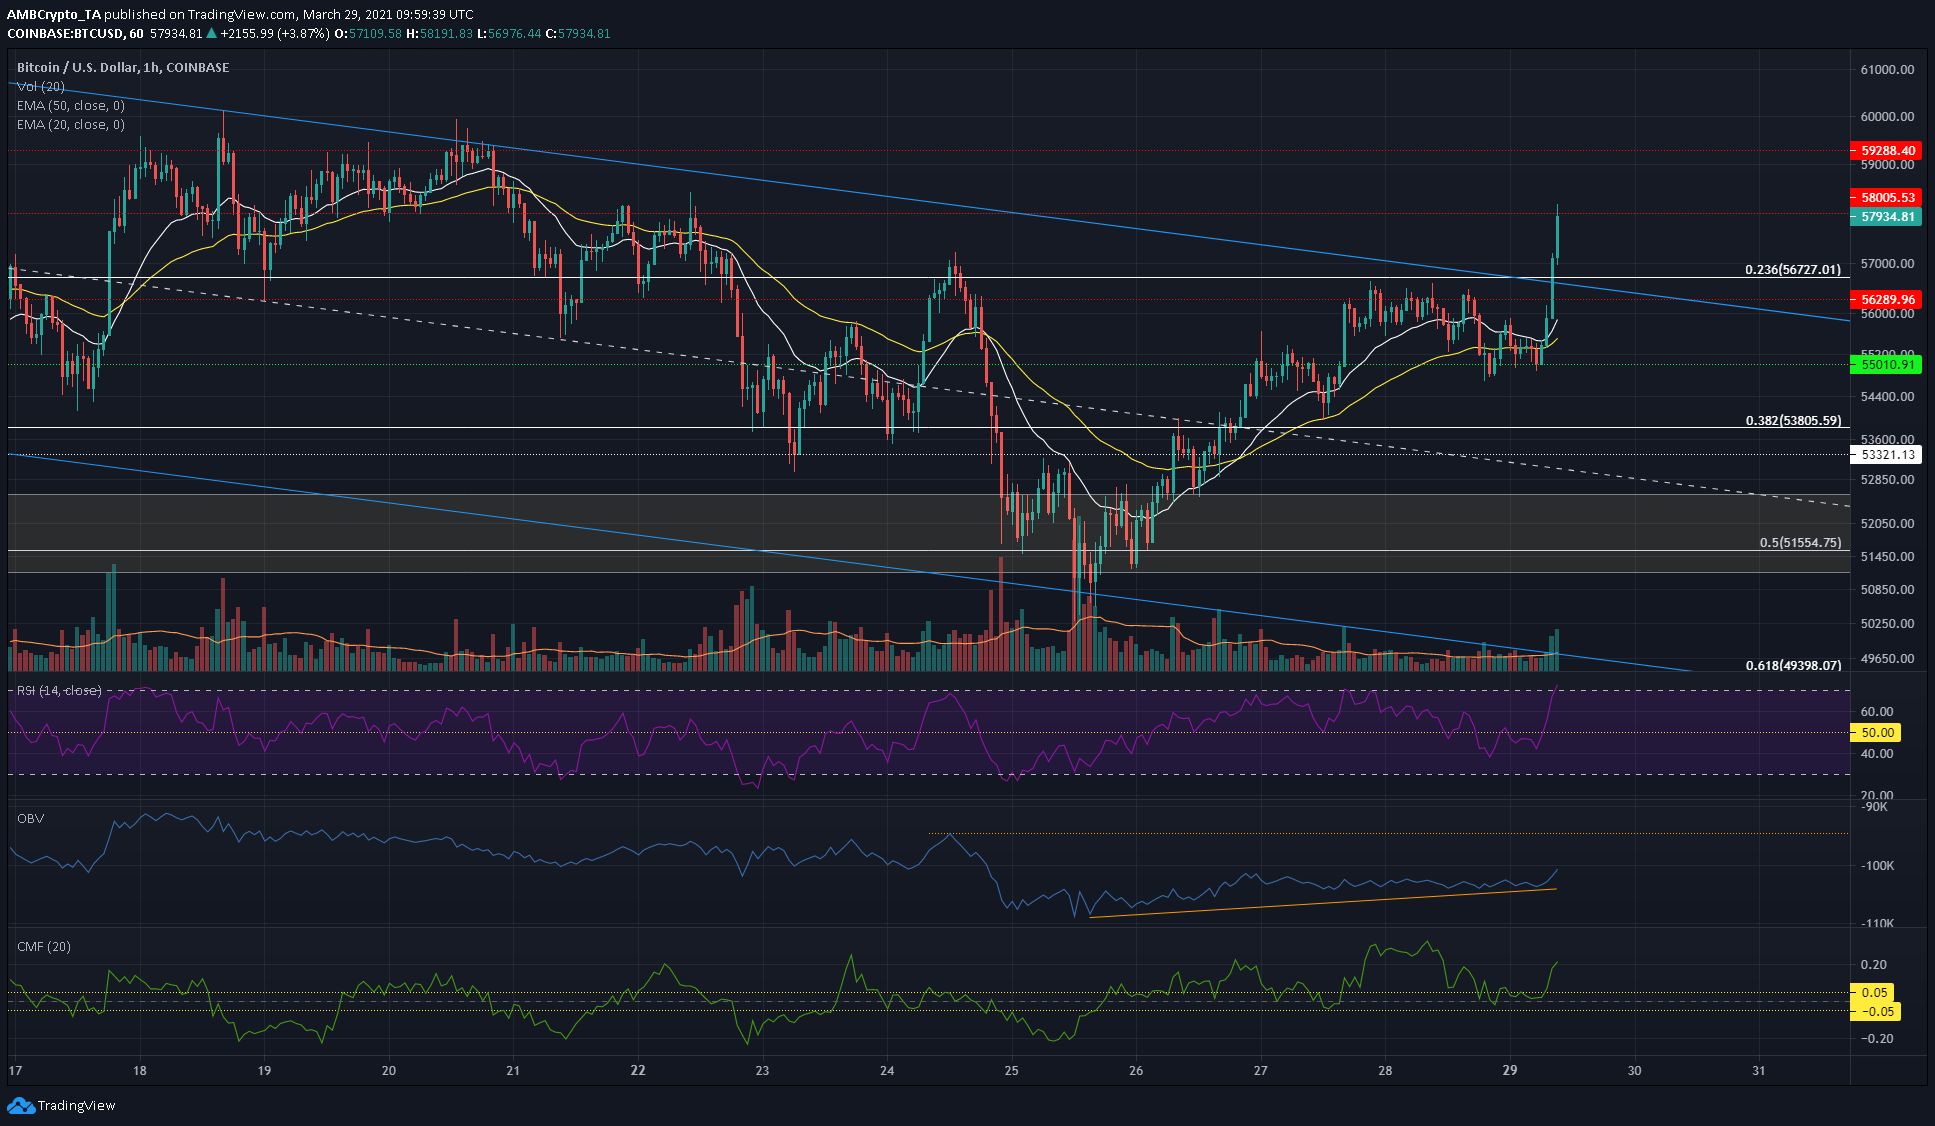 Bitcoin Price Analysis: 29 March